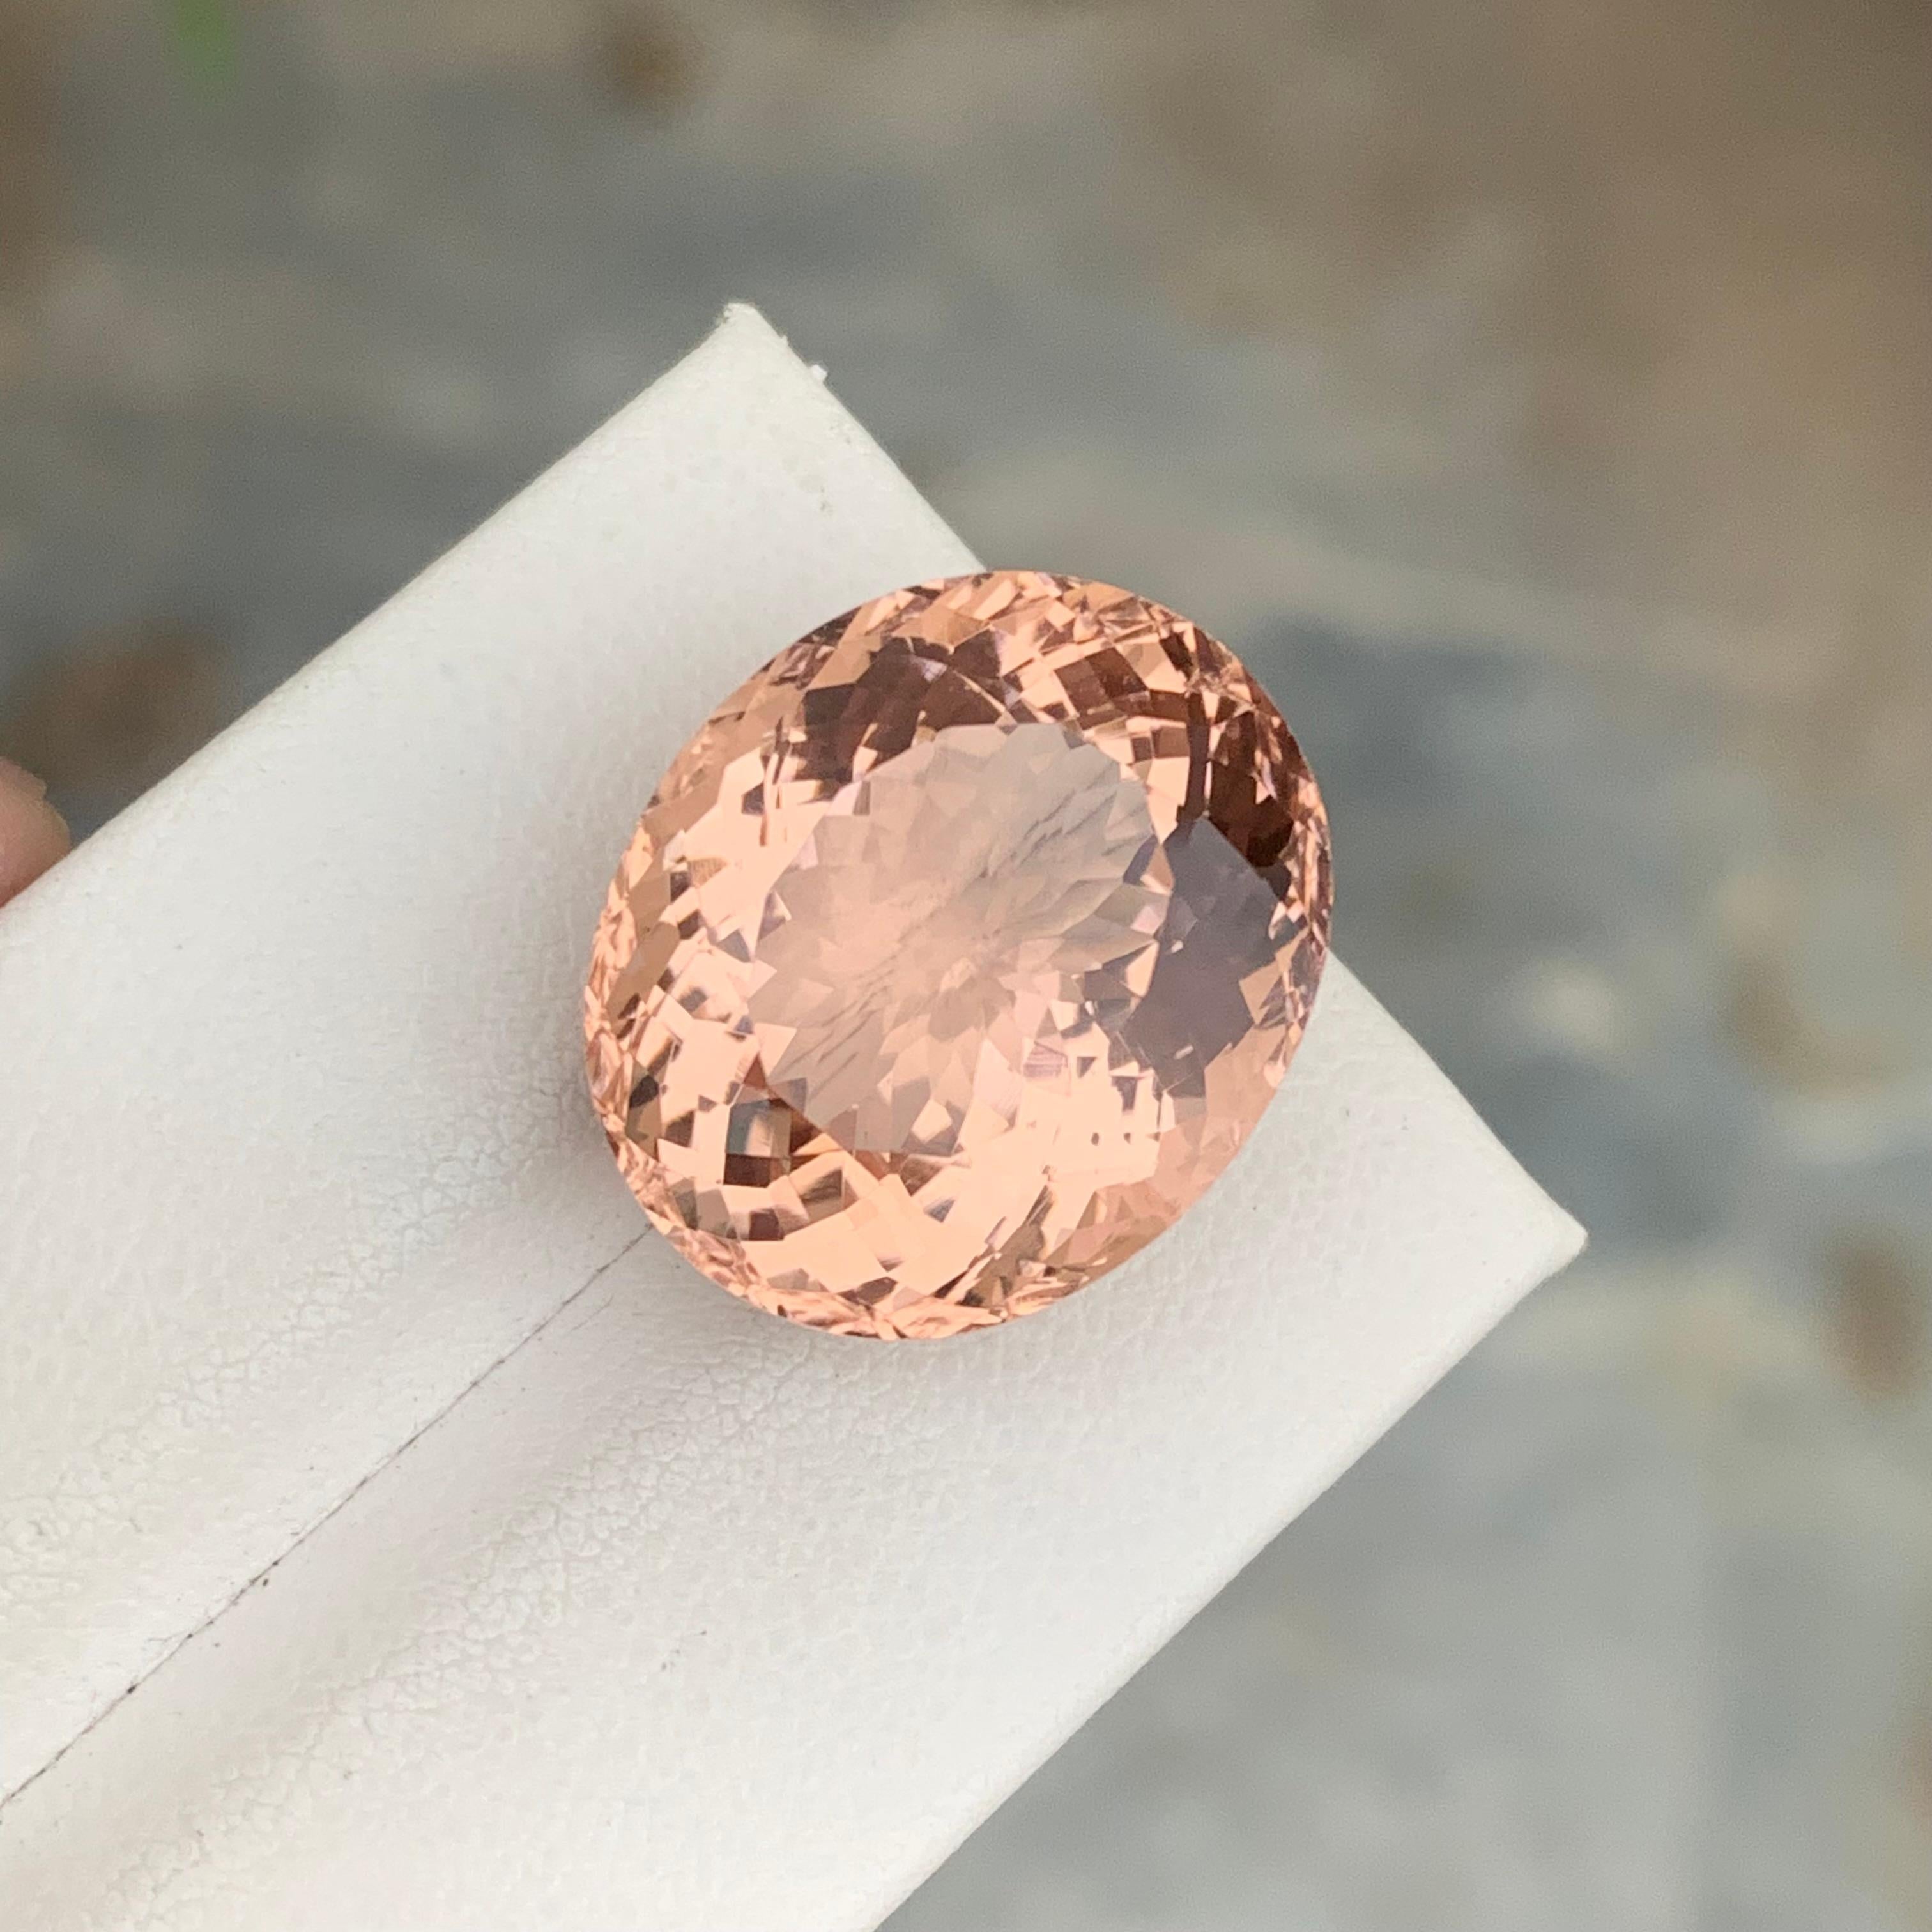 Gemstone Type : Morganite
Weight : 20.40 Carats
Dimensions : 19.3x16.2x11.2 Mm
Origin : Africa
Clarity : Eye Clean
Shape: Oval
Color: Peach
Certificate: On Demand
Morganite is believed to bring healing, compassion and promise to those who wear it.